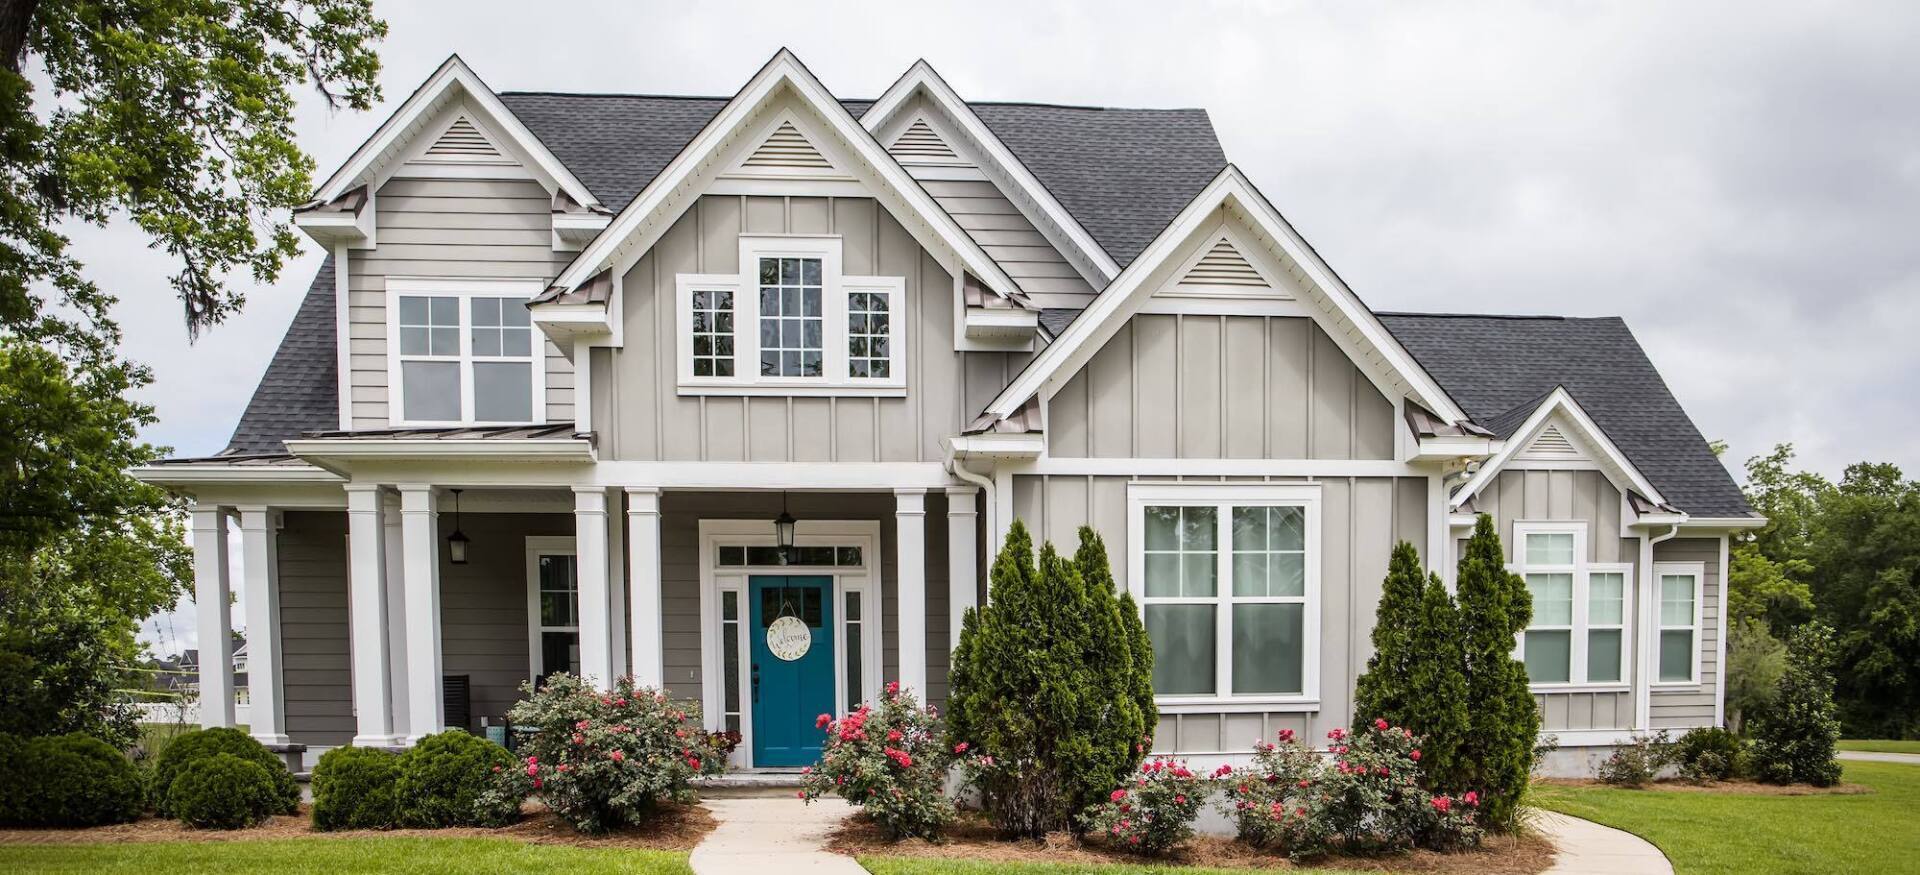 Replacement windows can improve curb appeal